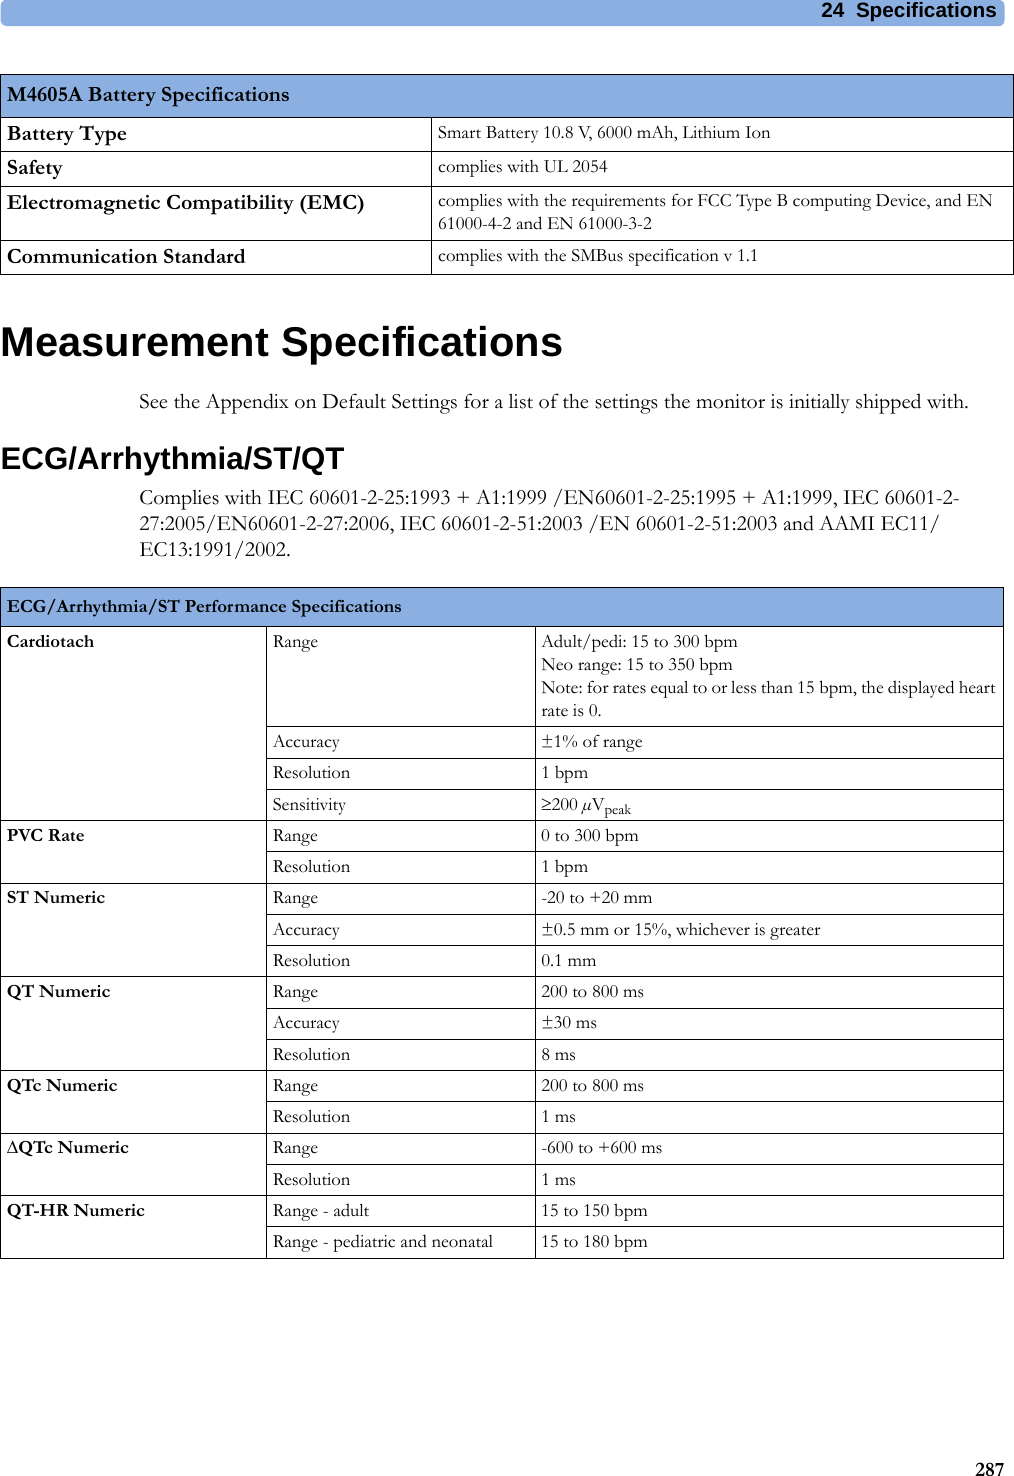 24 Specifications287Measurement SpecificationsSee the Appendix on Default Settings for a list of the settings the monitor is initially shipped with.ECG/Arrhythmia/ST/QTComplies with IEC 60601-2-25:1993 + A1:1999 /EN60601-2-25:1995 + A1:1999, IEC 60601-2-27:2005/EN60601-2-27:2006, IEC 60601-2-51:2003 /EN 60601-2-51:2003 and AAMI EC11/EC13:1991/2002.Battery Type Smart Battery 10.8 V, 6000 mAh, Lithium IonSafety complies with UL 2054Electromagnetic Compatibility (EMC) complies with the requirements for FCC Type B computing Device, and EN 61000-4-2 and EN 61000-3-2Communication Standard complies with the SMBus specification v 1.1M4605A Battery SpecificationsECG/Arrhythmia/ST Performance SpecificationsCardiotach Range Adult/pedi: 15 to 300 bpmNeo range: 15 to 350 bpmNote: for rates equal to or less than 15 bpm, the displayed heart rate is 0.Accuracy ±1% of rangeResolution 1 bpmSensitivity 200 µVpeakPVC Rate Range 0 to 300 bpmResolution 1 bpmST Numeric Range -20 to +20 mmAccuracy ±0.5 mm or 15%, whichever is greaterResolution 0.1 mmQT Numeric Range 200 to 800 msAccuracy ±30 msResolution 8 msQTc Numeric Range 200 to 800 msResolution 1 msQTc Numeric Range -600 to +600 msResolution 1 msQT-HR Numeric Range - adult 15 to 150 bpmRange - pediatric and neonatal 15 to 180 bpm